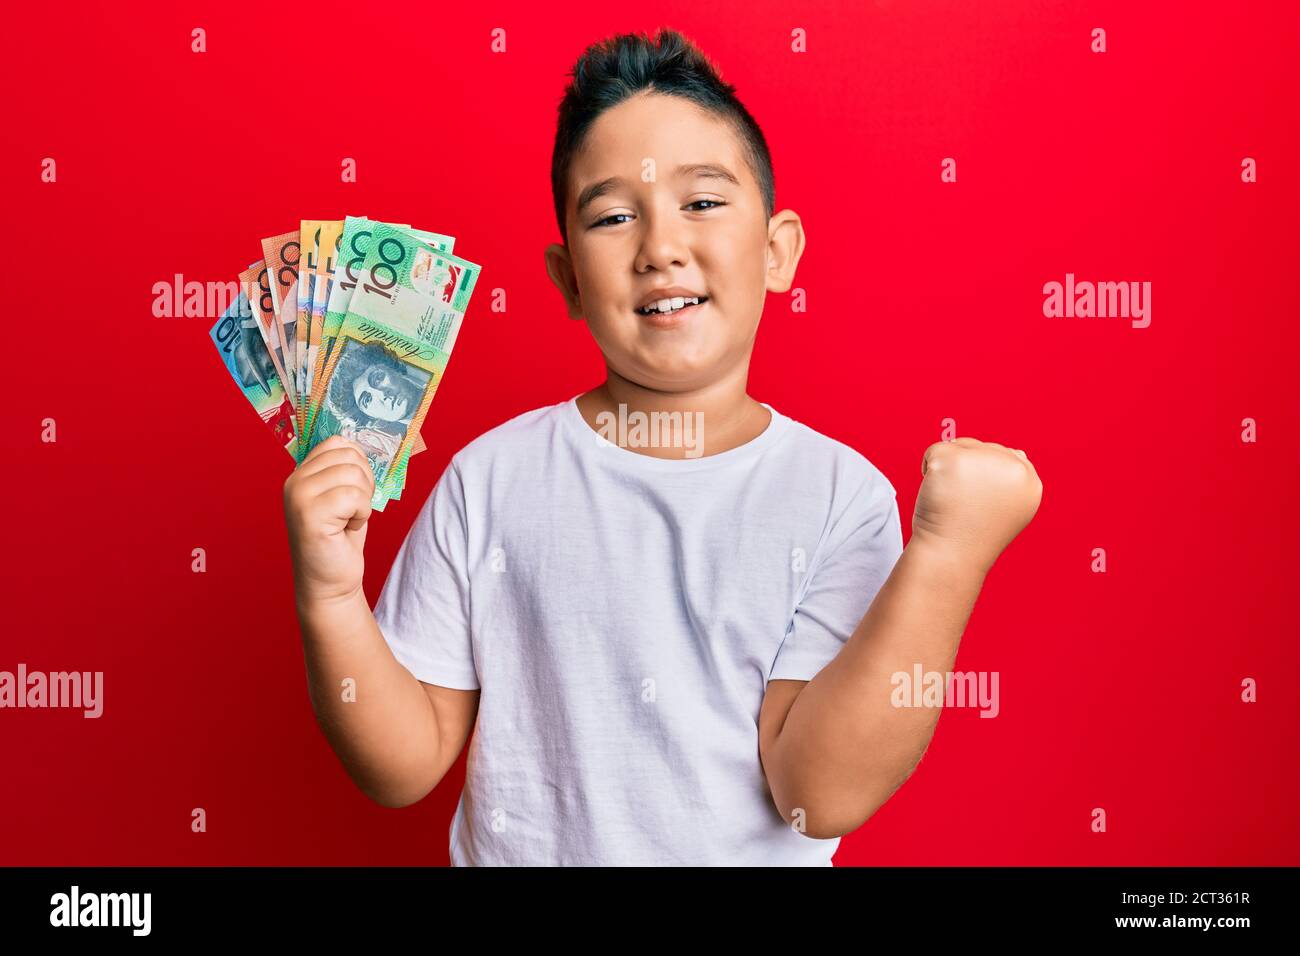 Little boy hispanic kid holding australian dollars screaming proud, celebrating victory and success very excited with raised arm Stock Photo